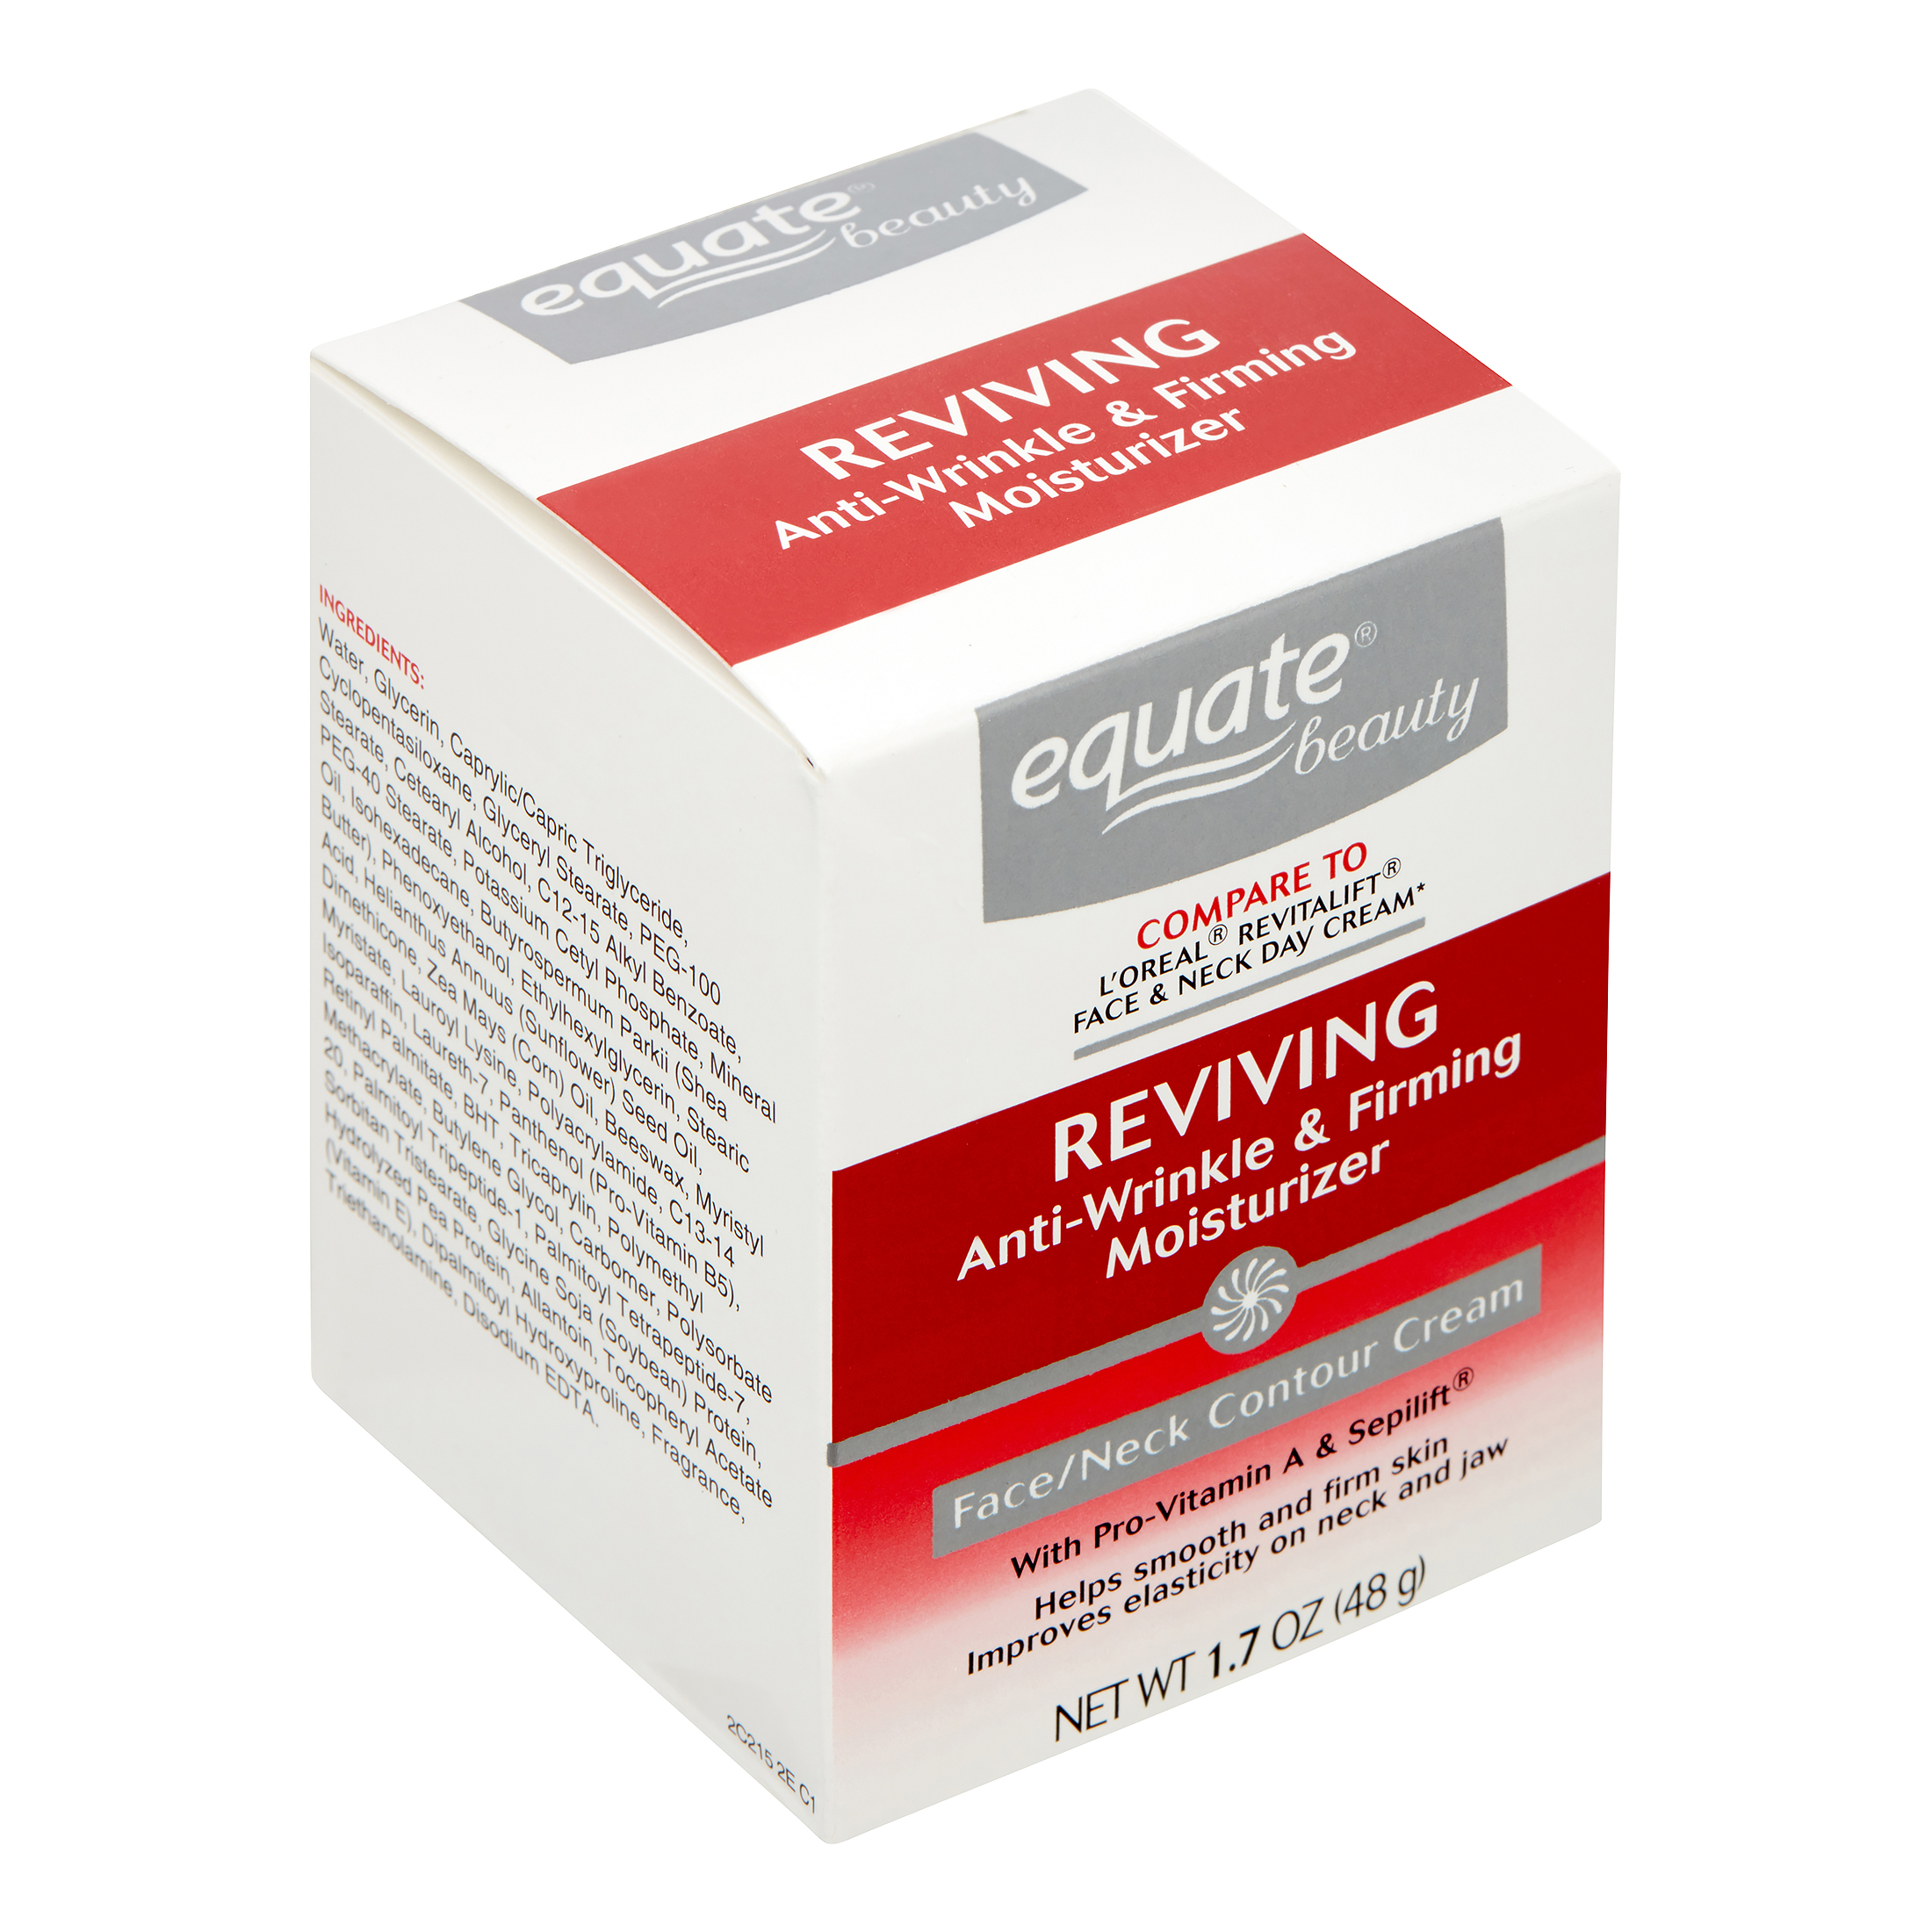 Equate Advanced Firming & Anti-Wrinkle Cream Face and Neck Moisturizer, 1.7oz - image 5 of 9